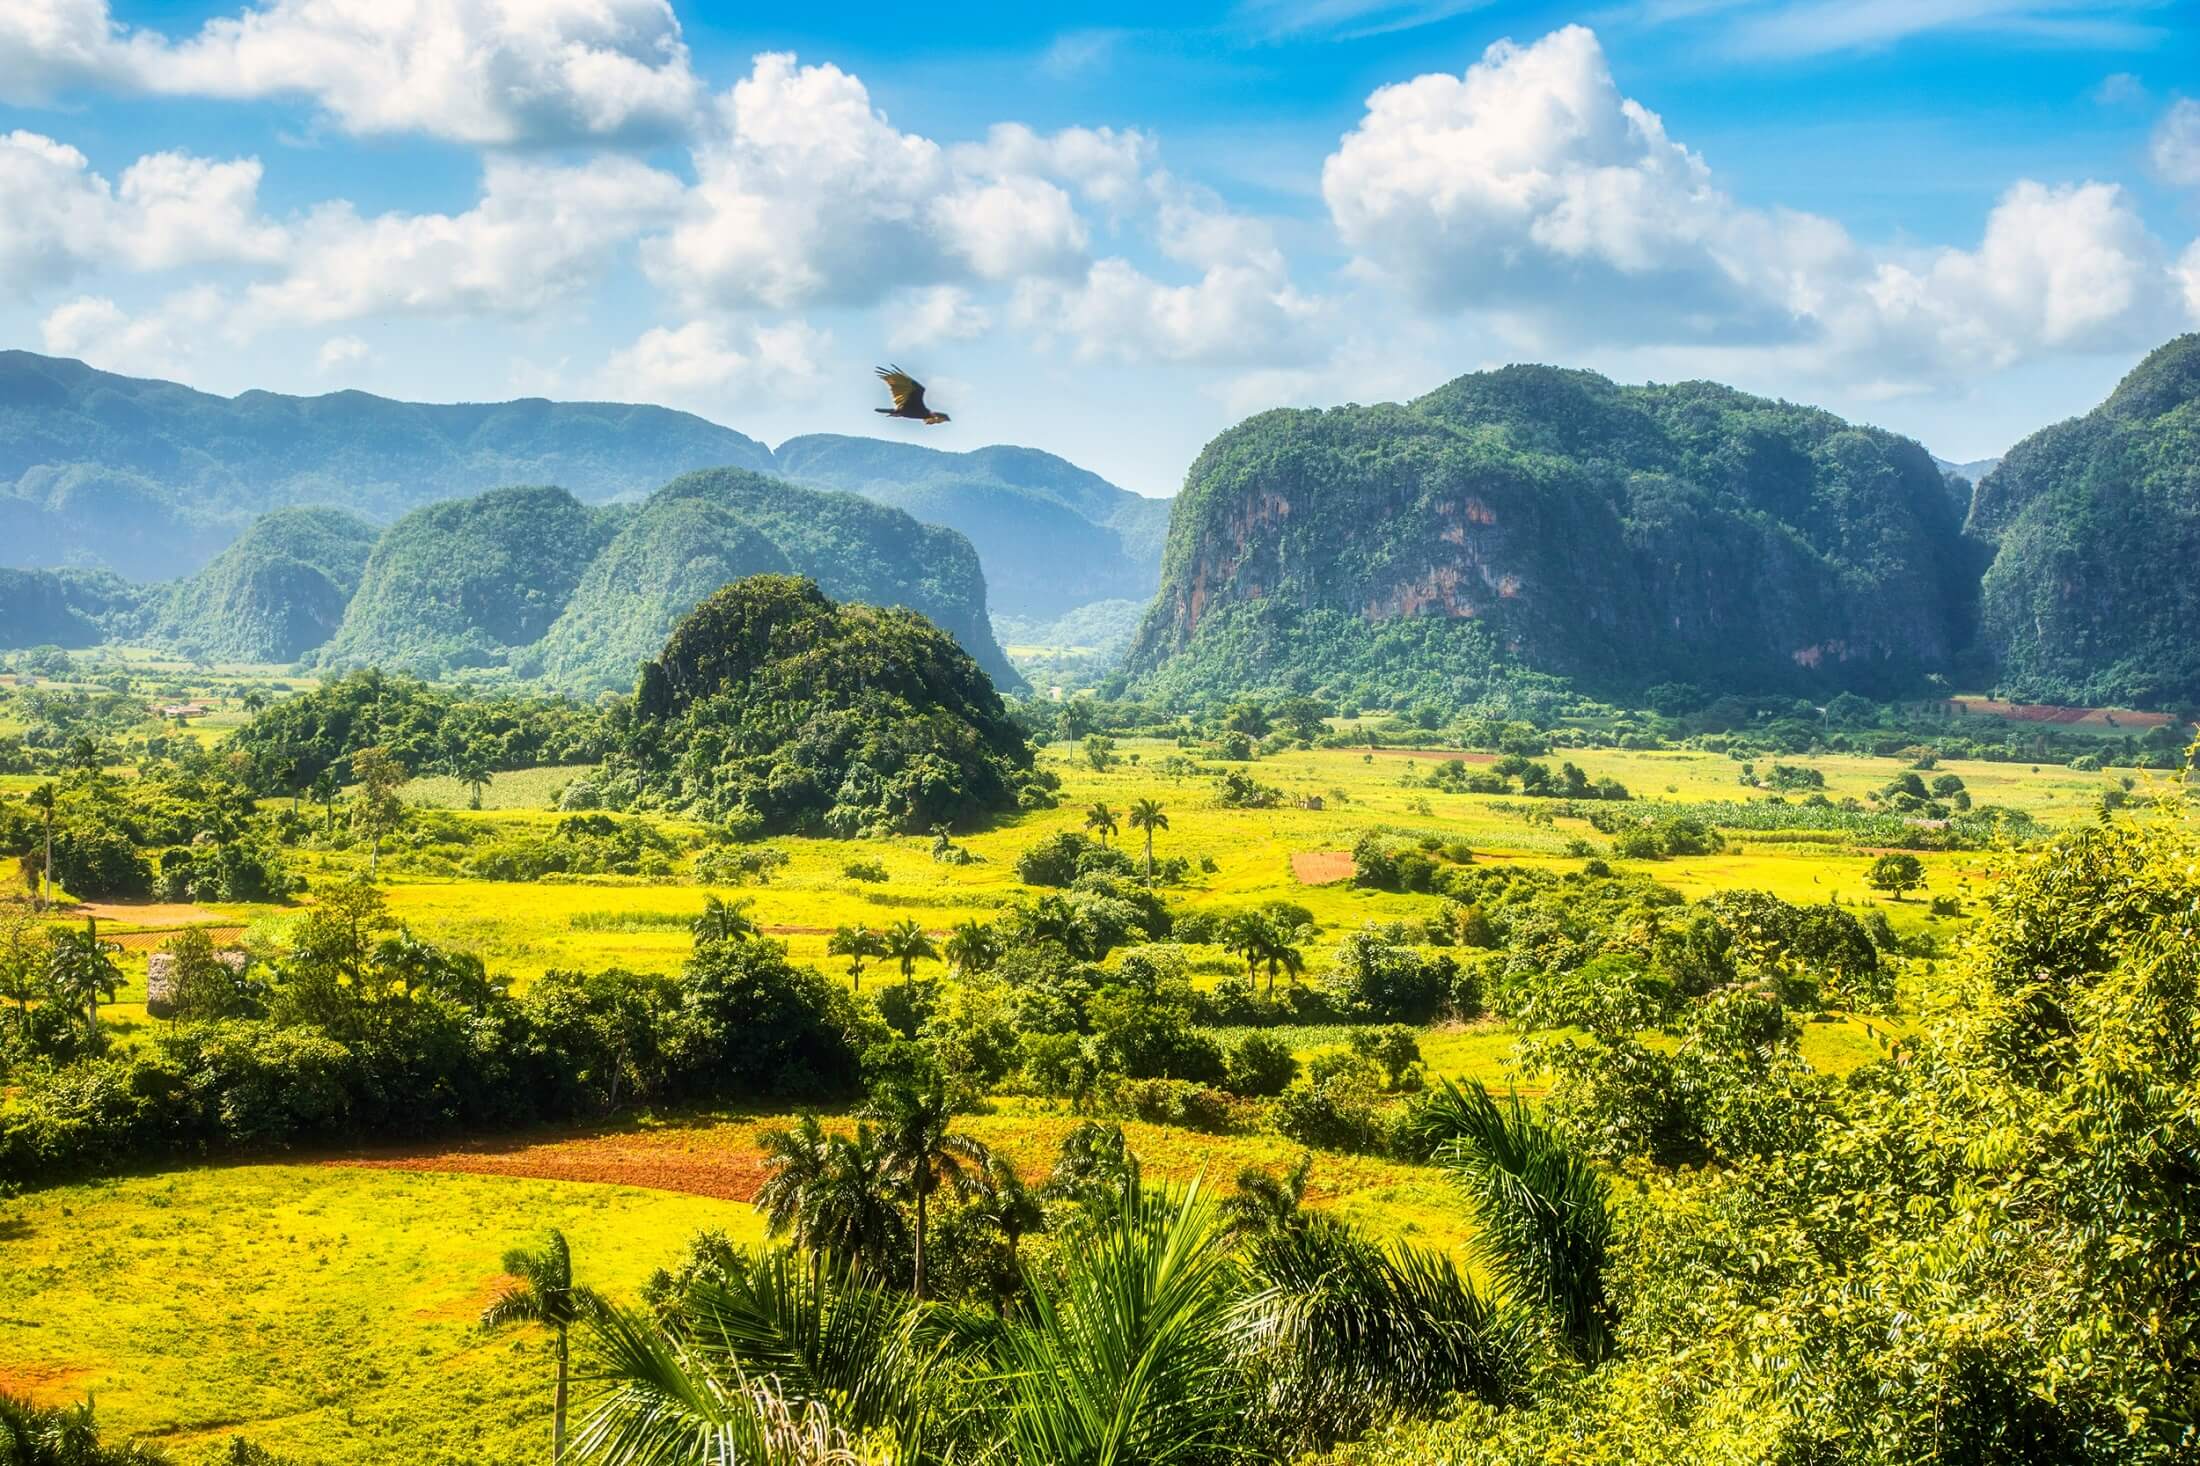 UNESCO valley of Vinales. Tropical and almost a rain forest. Located within a national park with the same name. A big bird is flying over